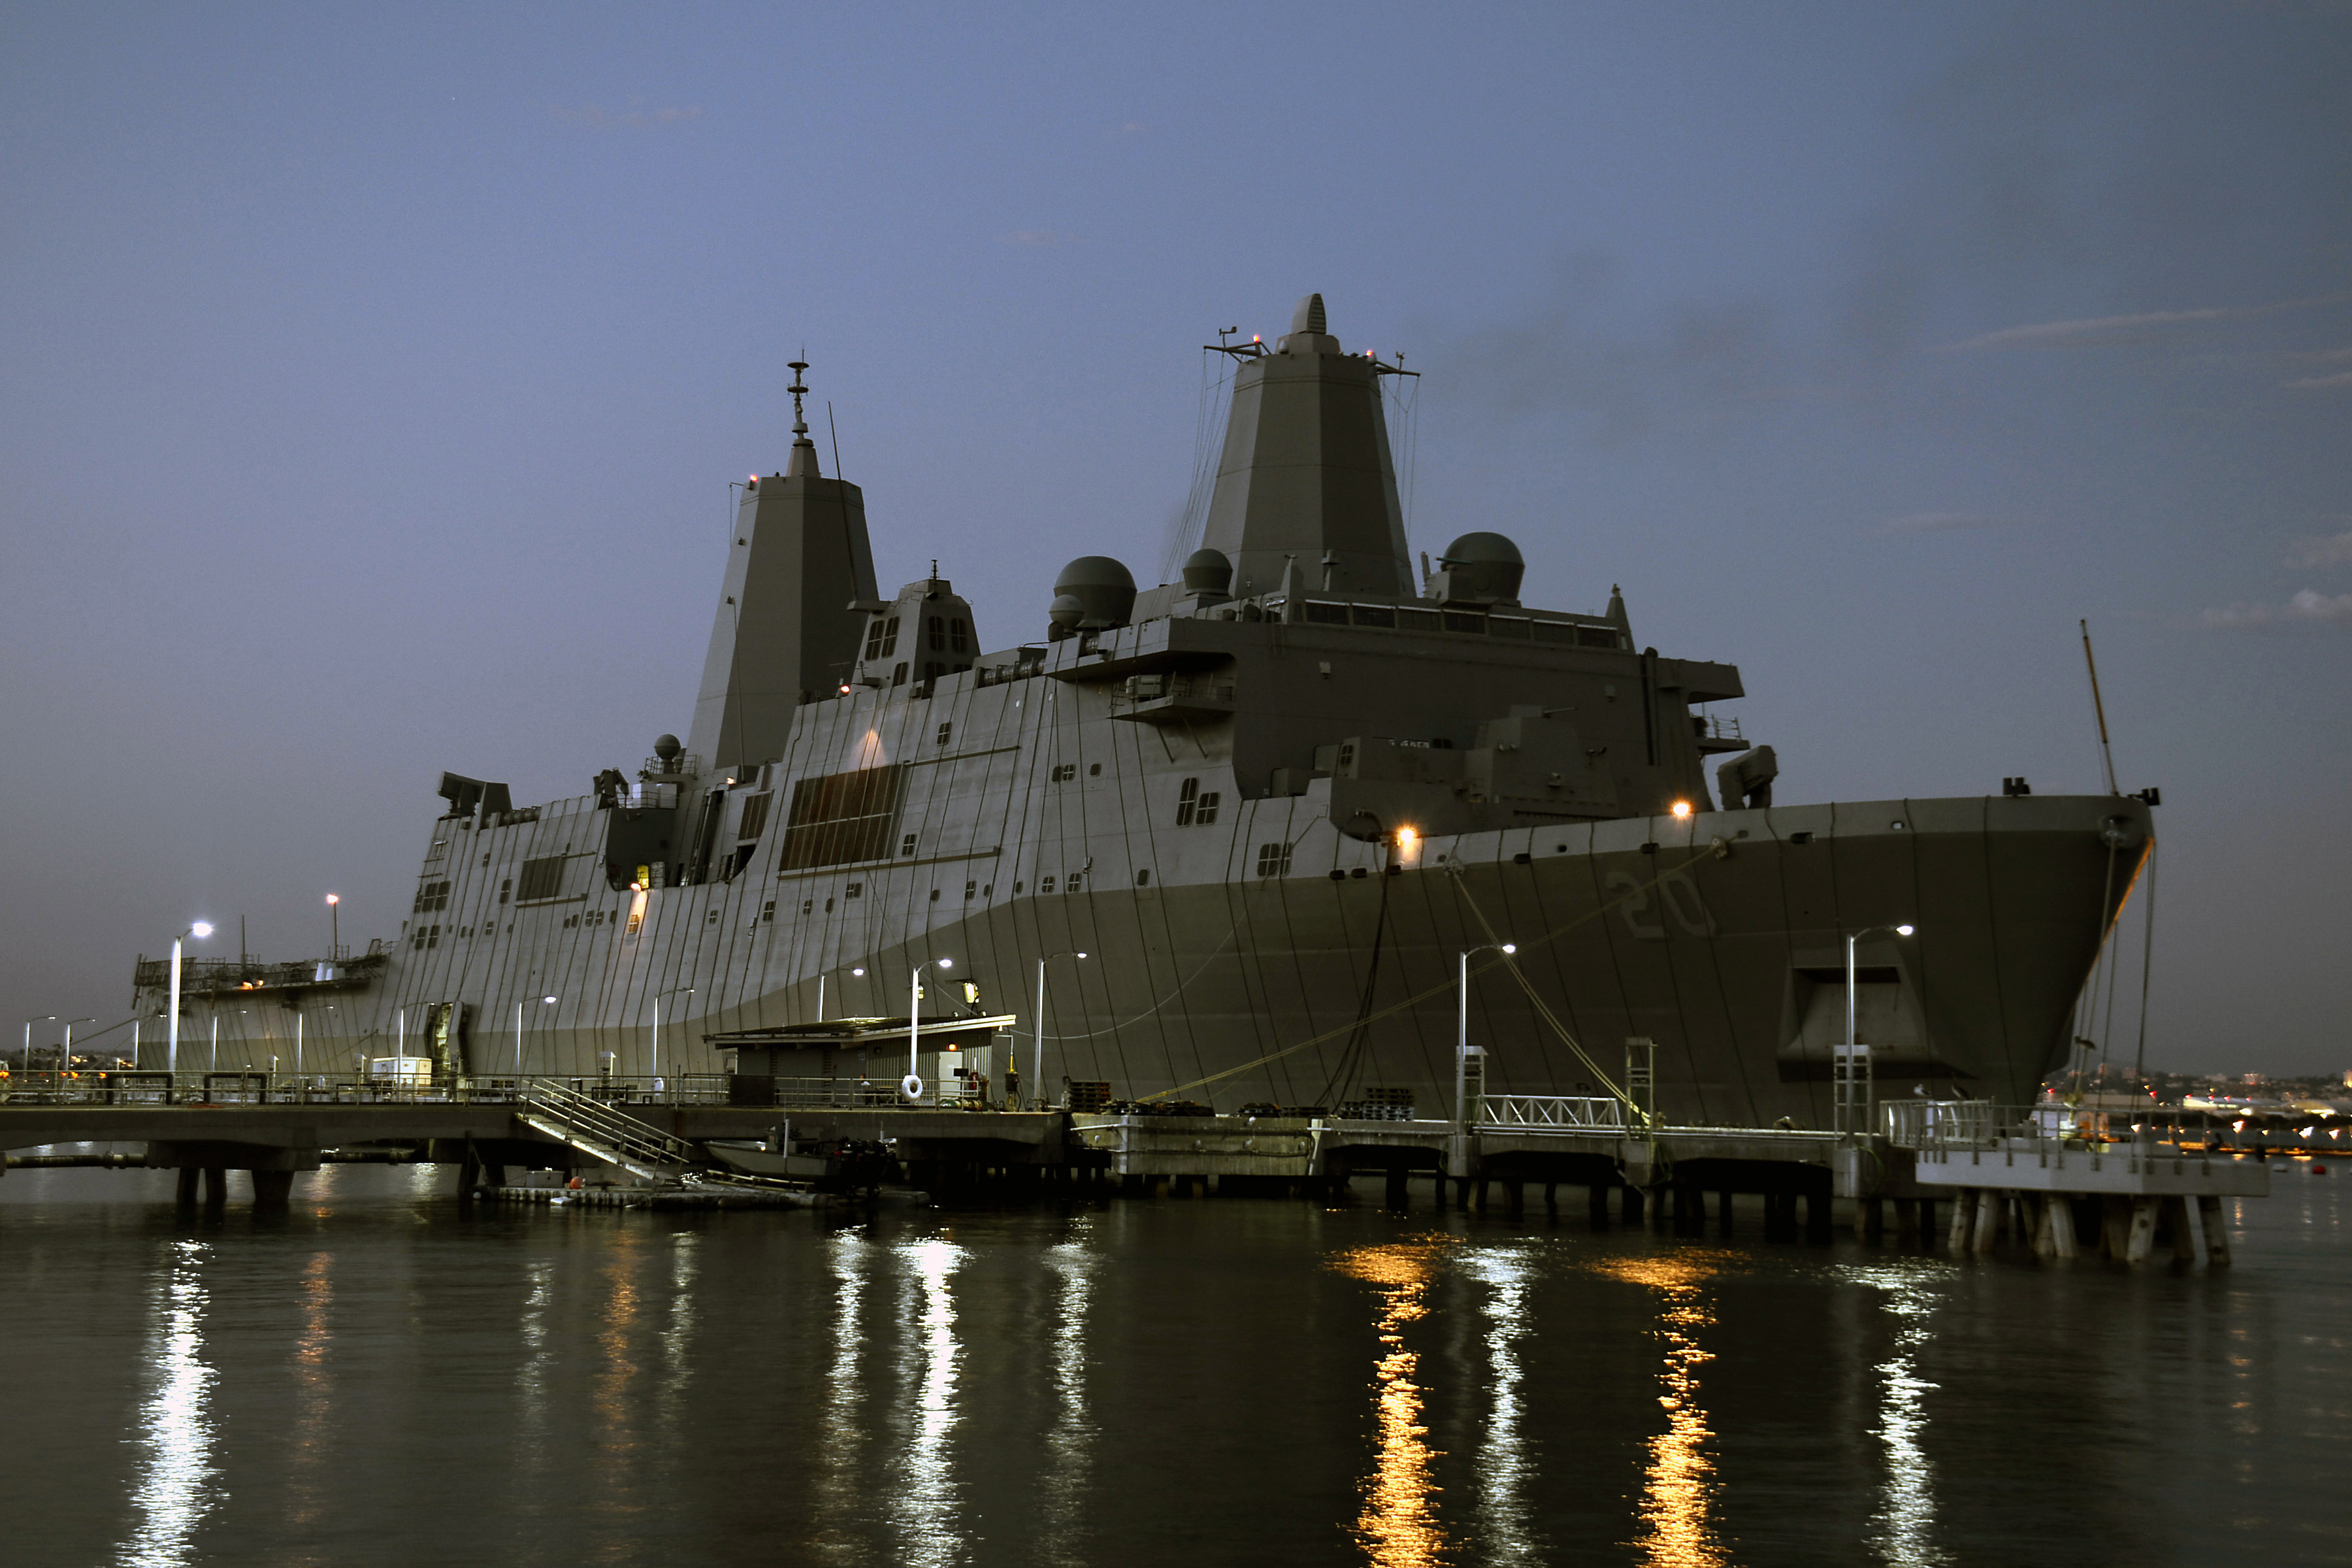  USS Green Bay (LPD 20) is moored at Naval Base Pt. Loma in preparation for a magnetic treatment (DEPERM) on Aug. 20, 2014. US Navy Photo